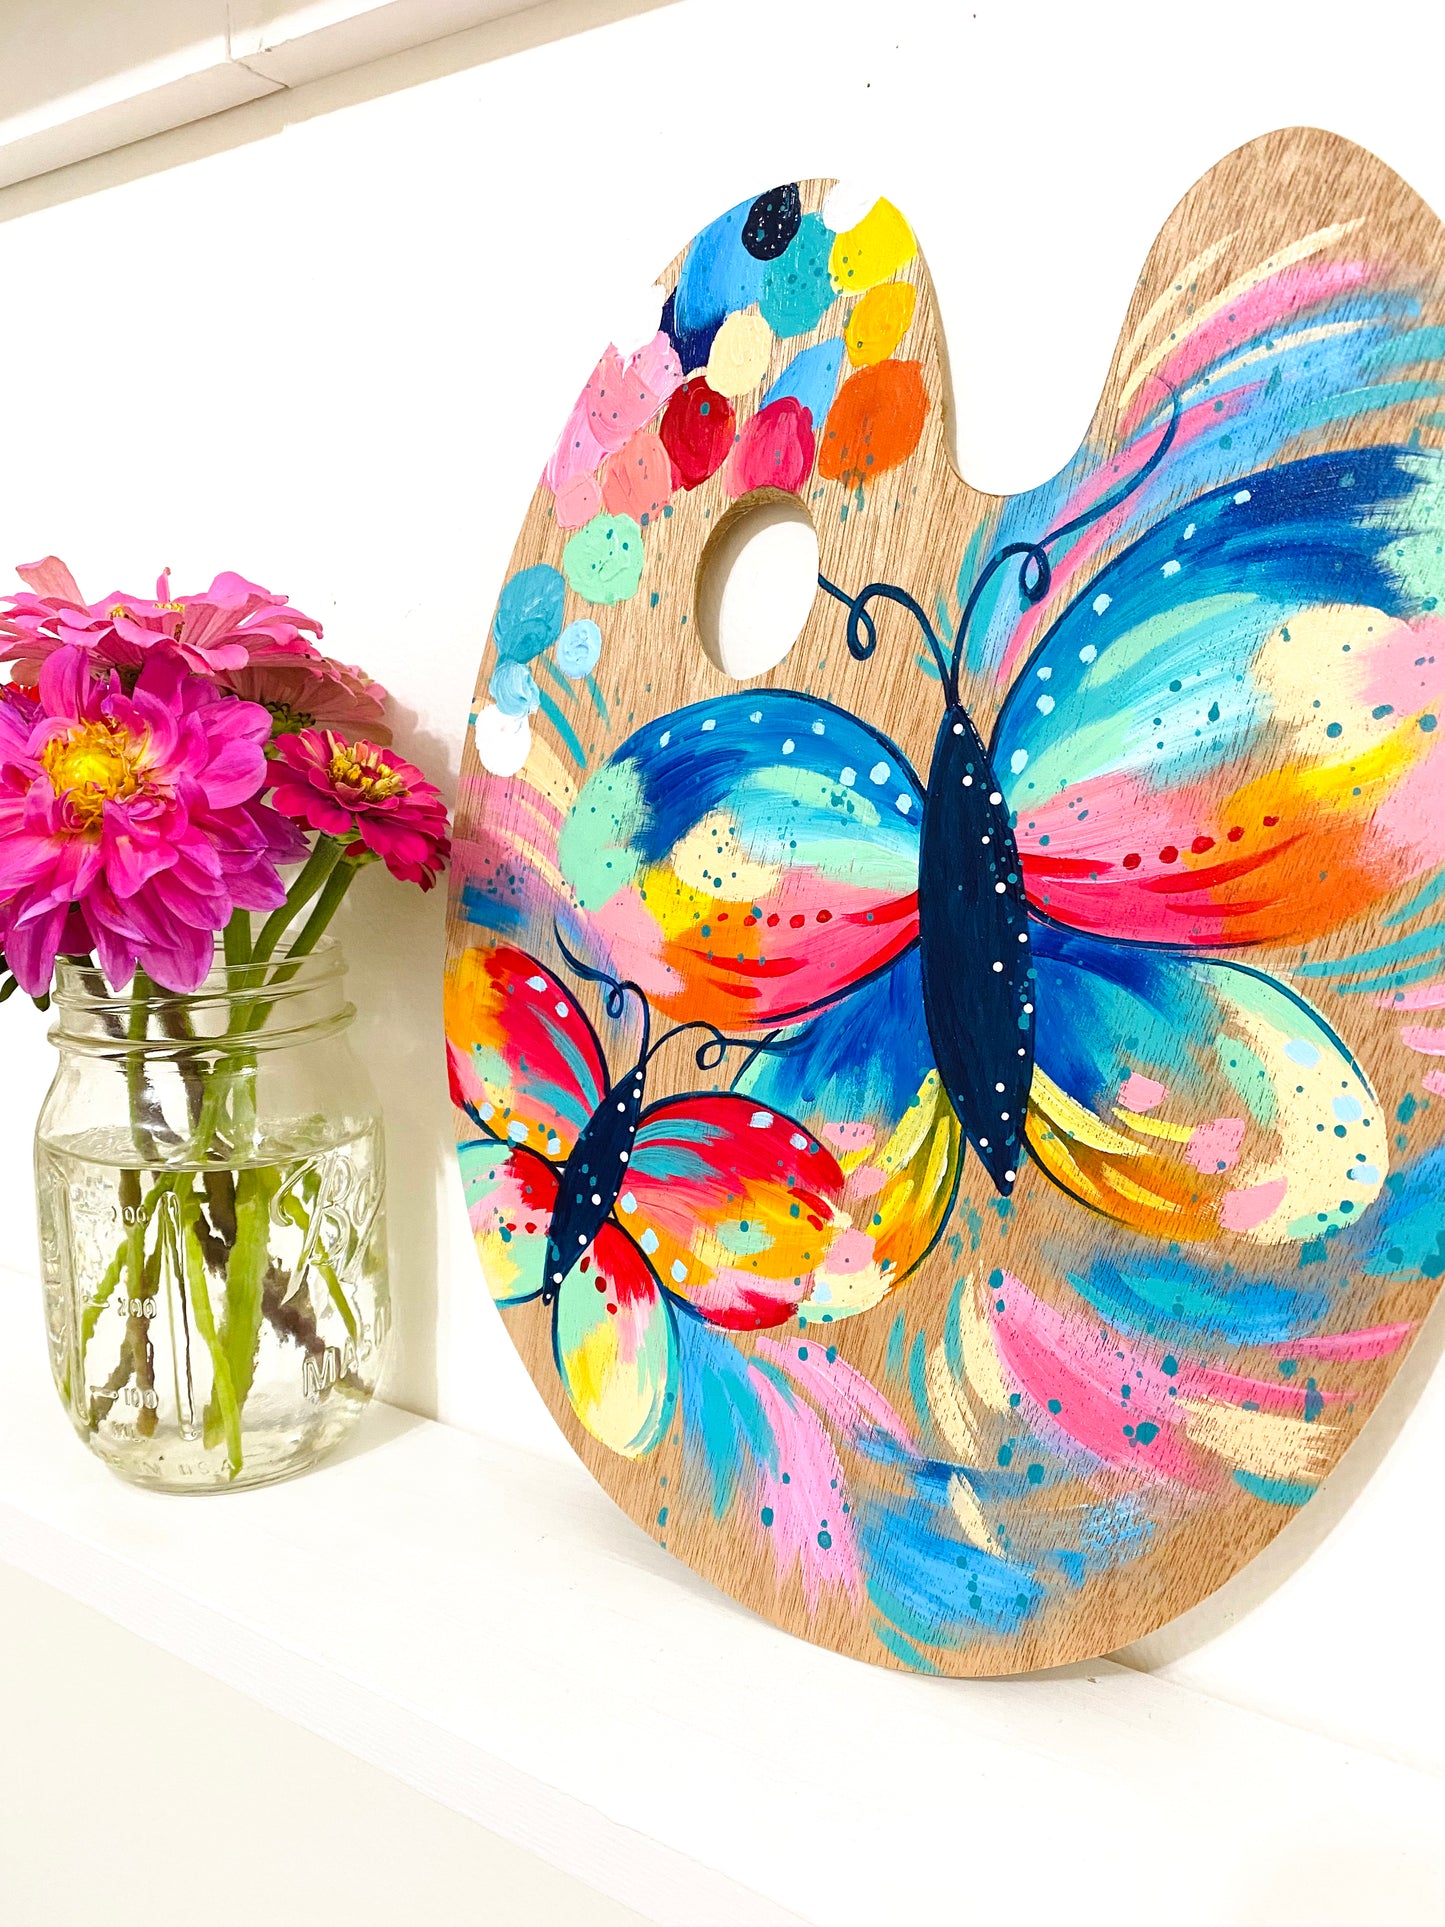 August 2022 Daily Paint Palette Original Painting Day 1 - Butterflies